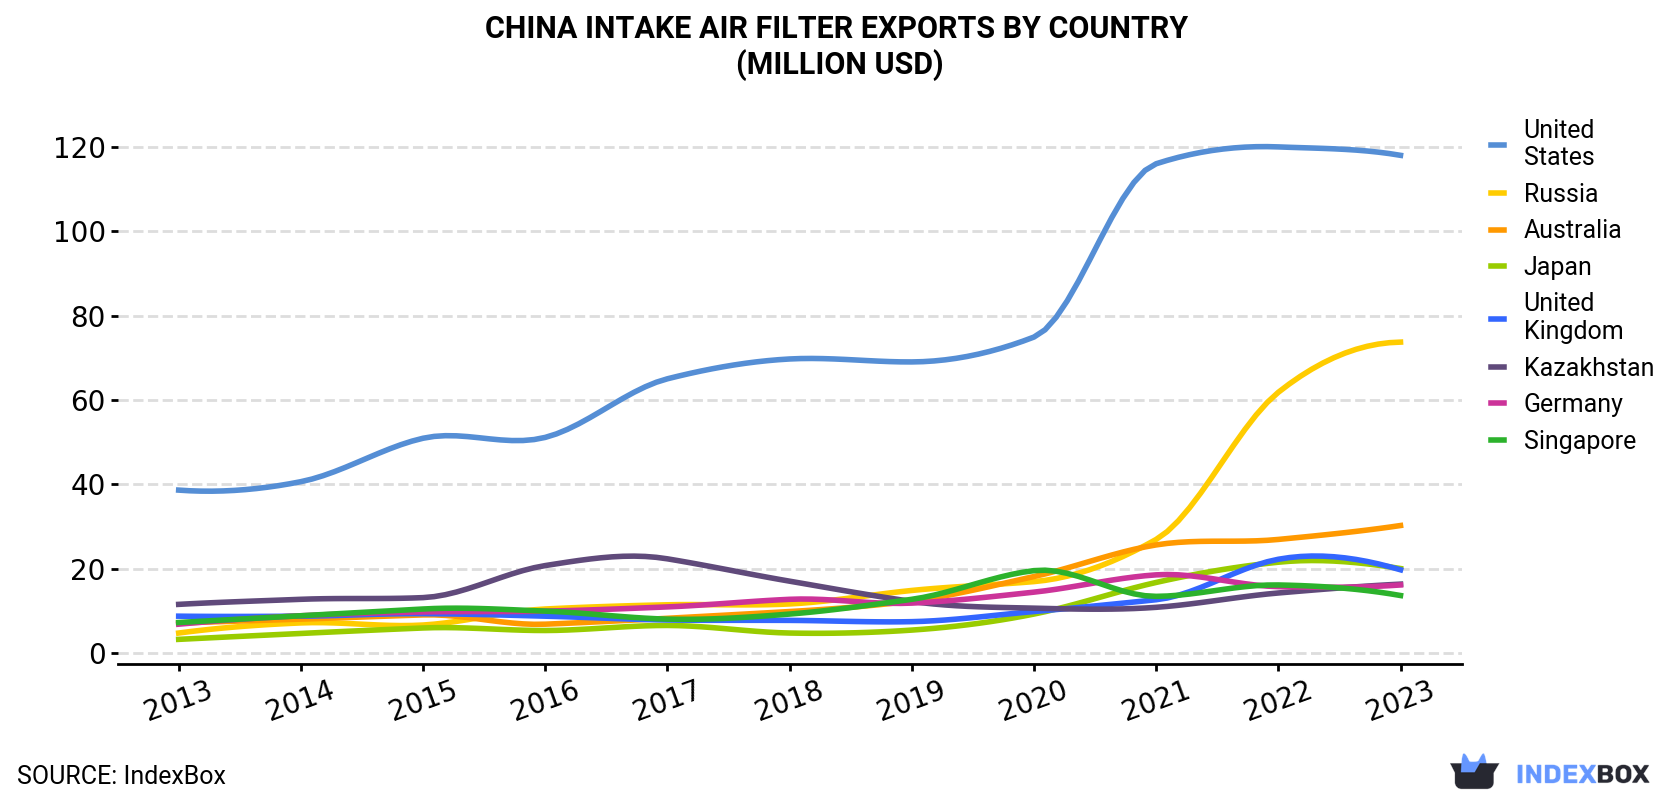 China Intake Air Filter Exports By Country (Million USD)